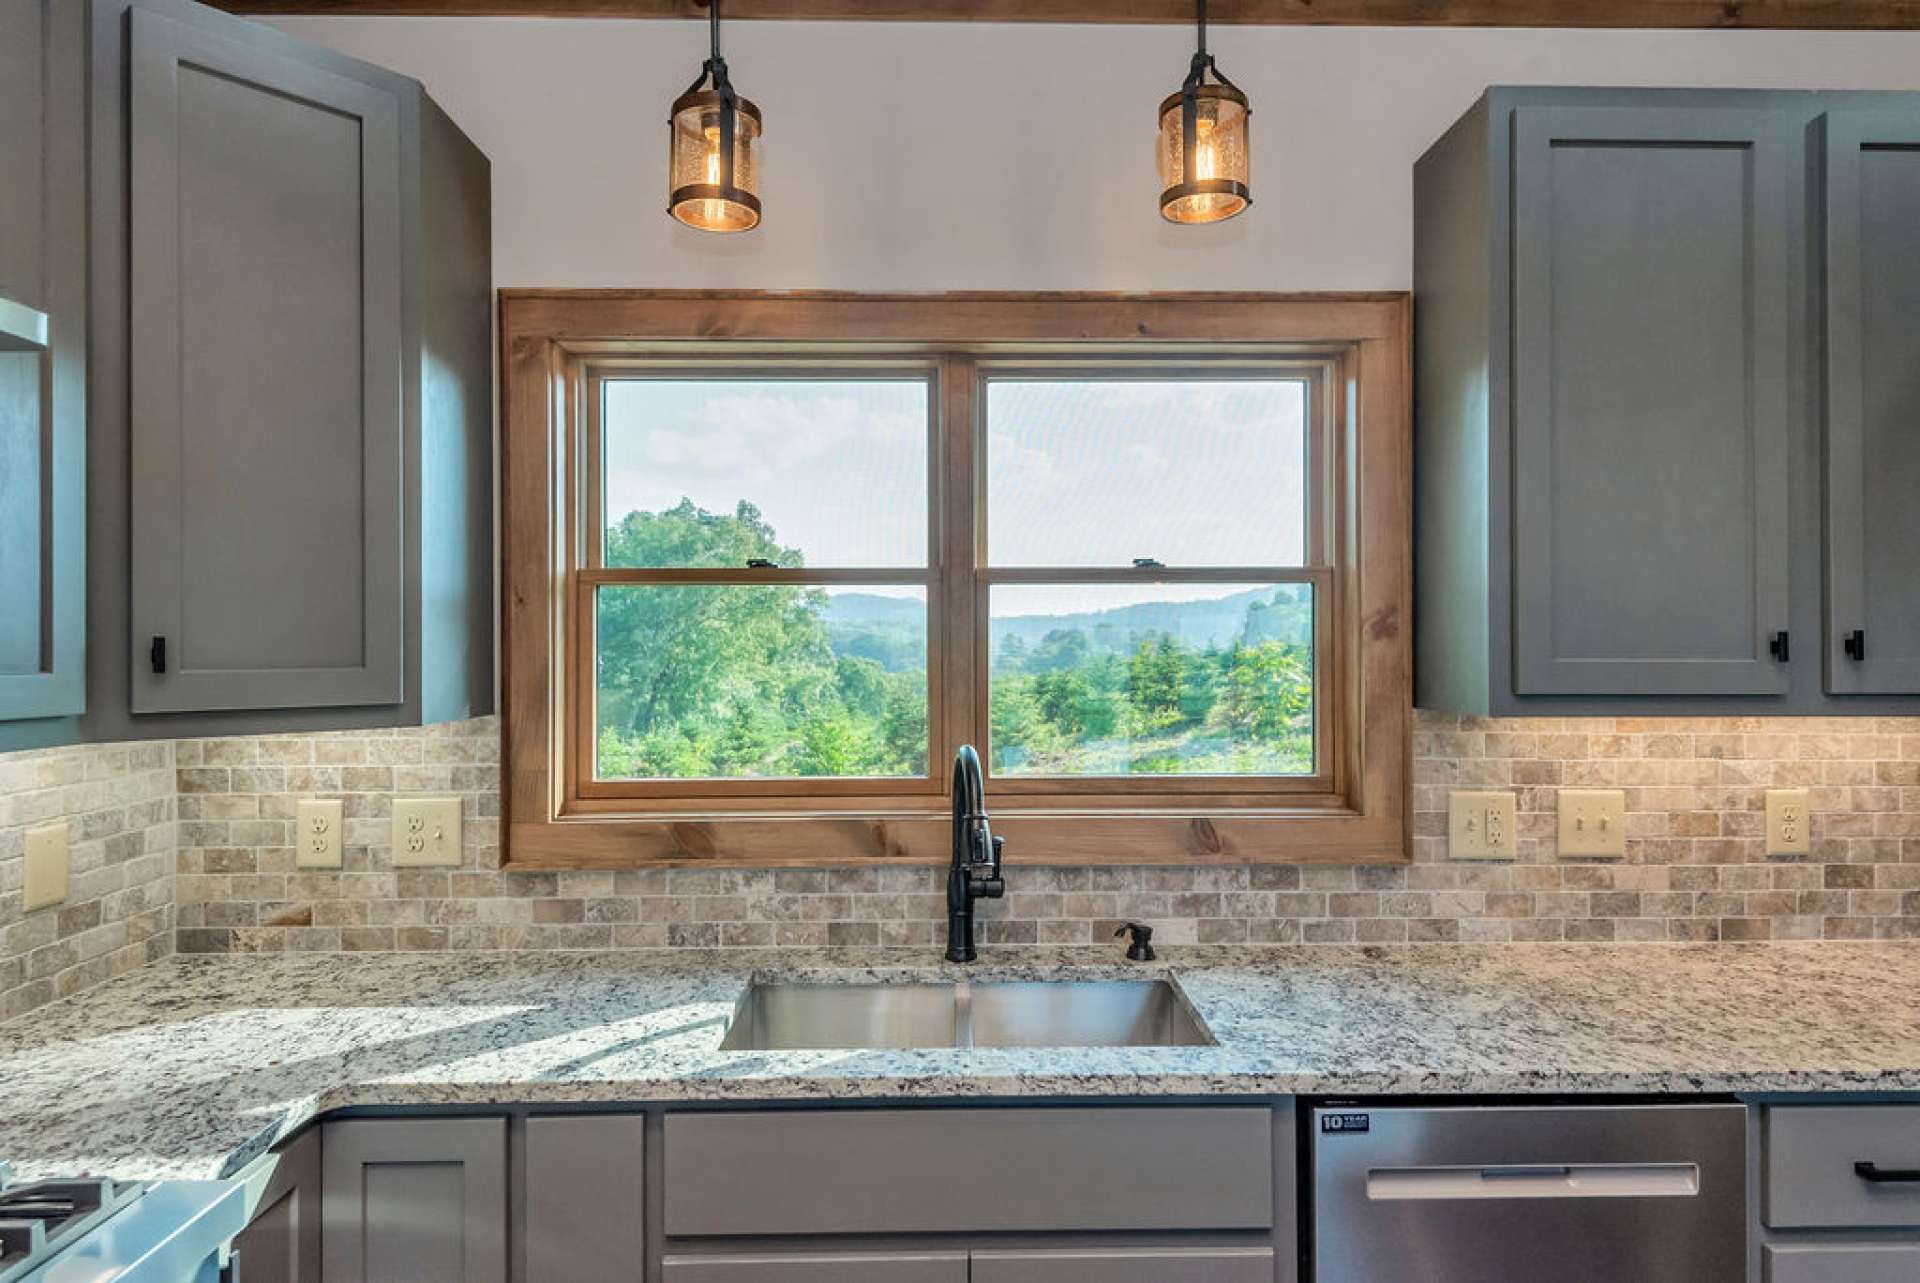 Tile backsplash blends perfectly with the granite counter top.